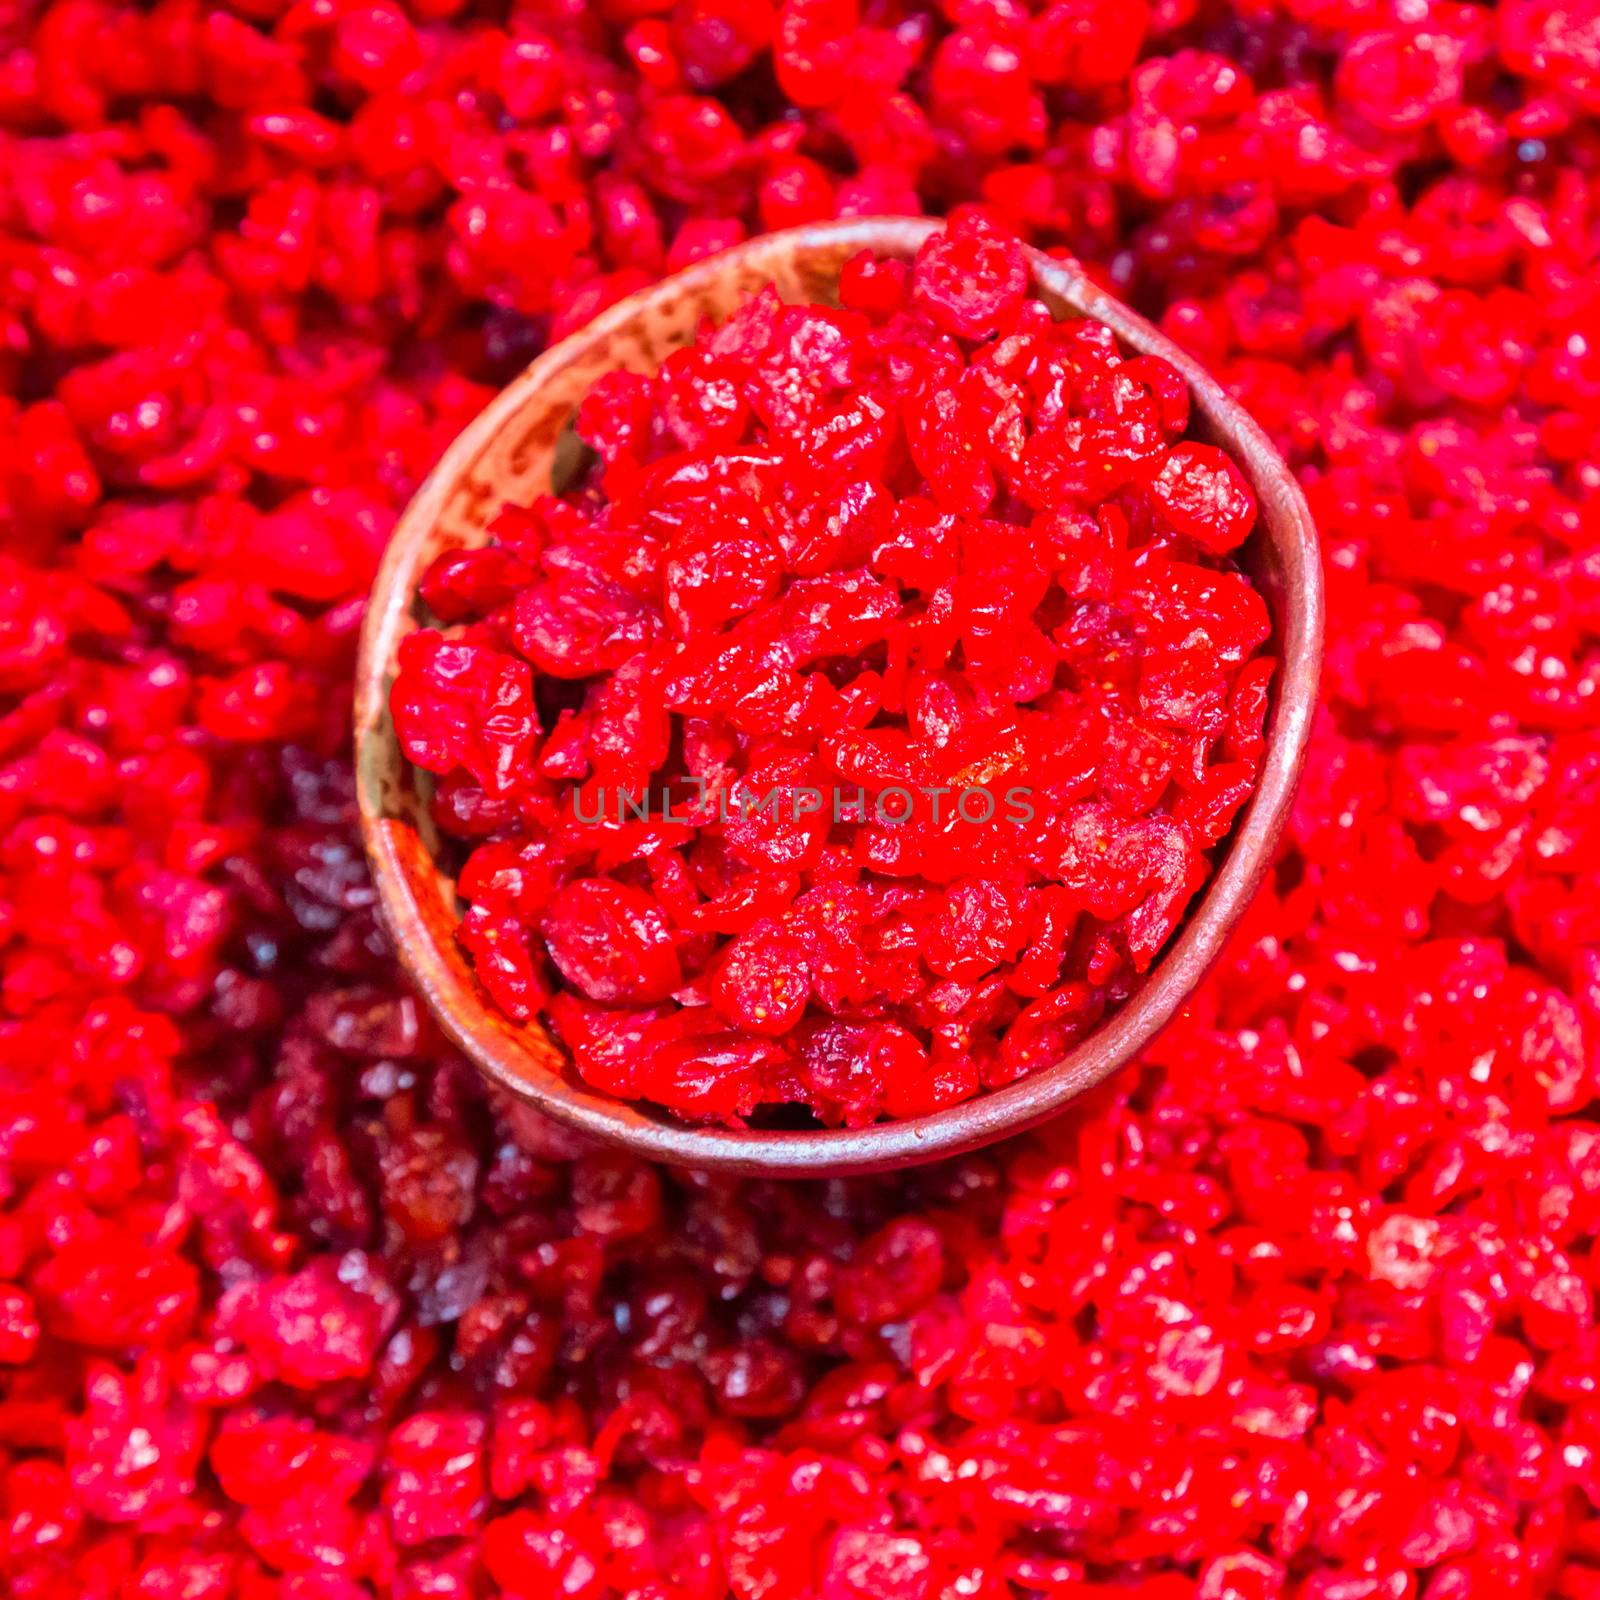 Scoop of dried cranberries beeing sold on local food market.